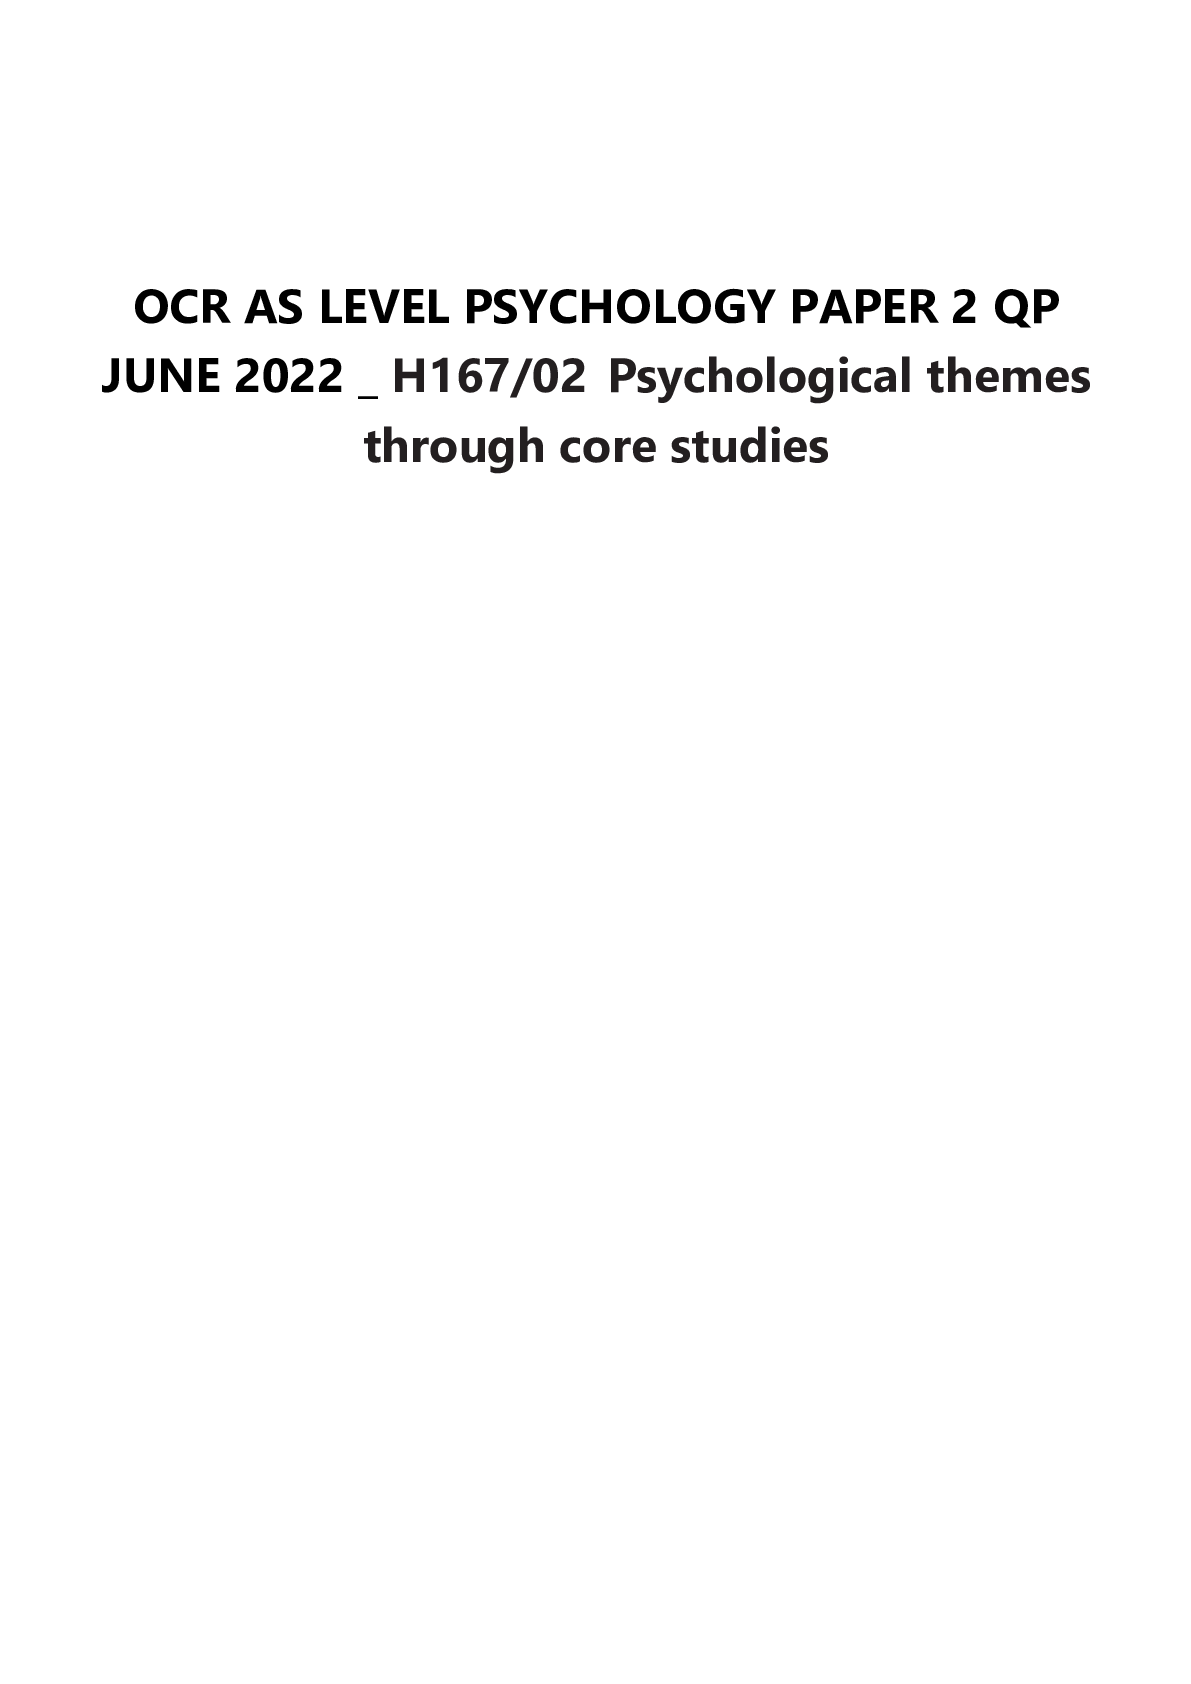 research methods ocr psychology past papers